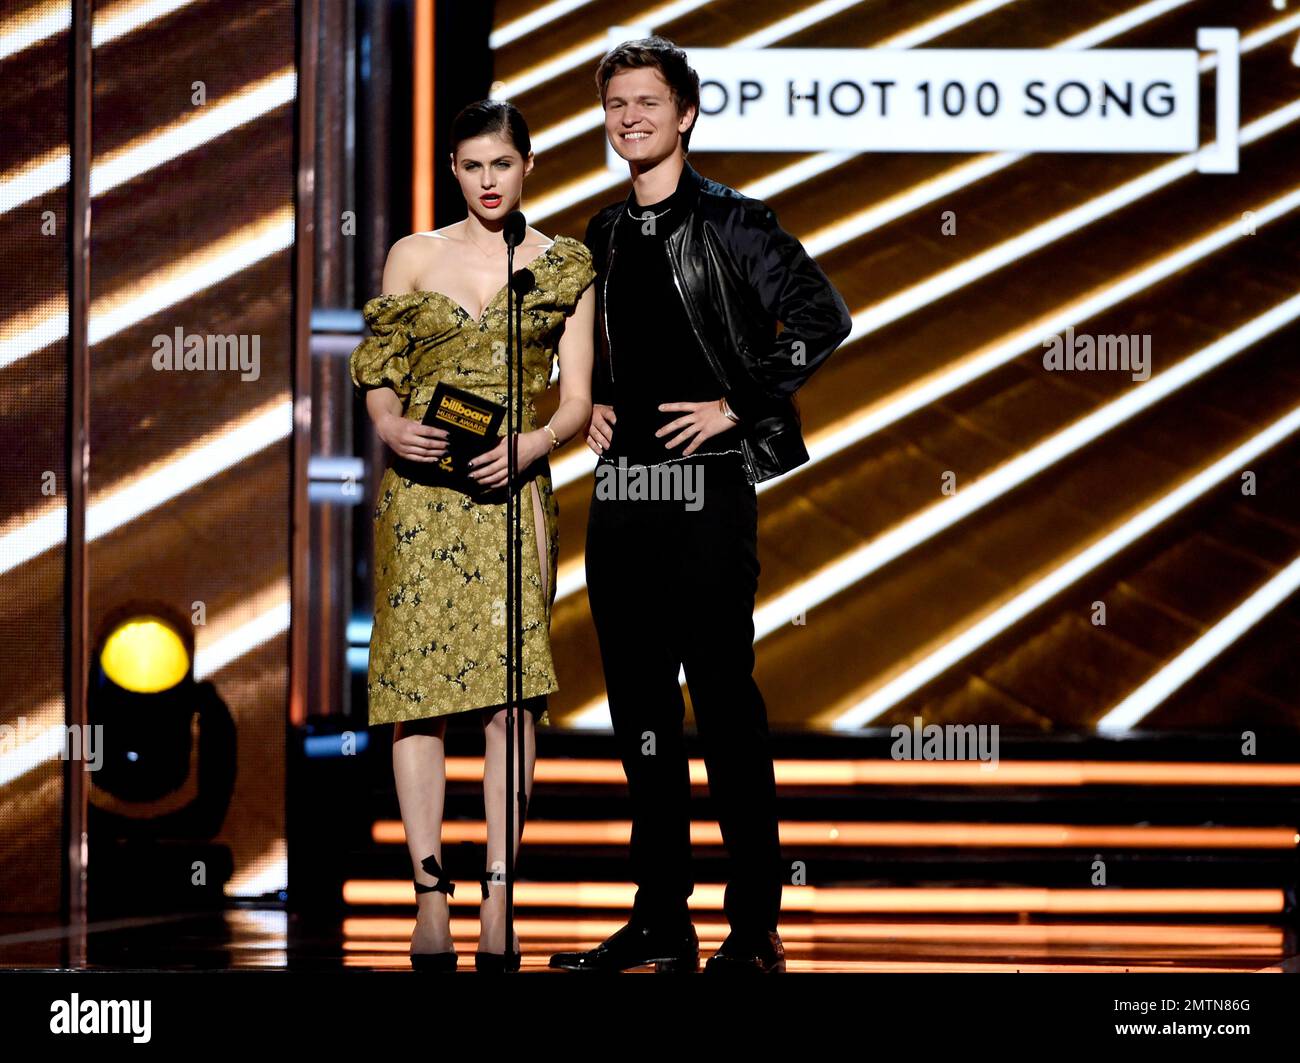 Alexandra Daddario and Ansel Elgort present the award for top hot 100 song  at the Billboard Music Awards at the T-Mobile Arena on Sunday, May 21,  2017, in Las Vegas. (Photo by